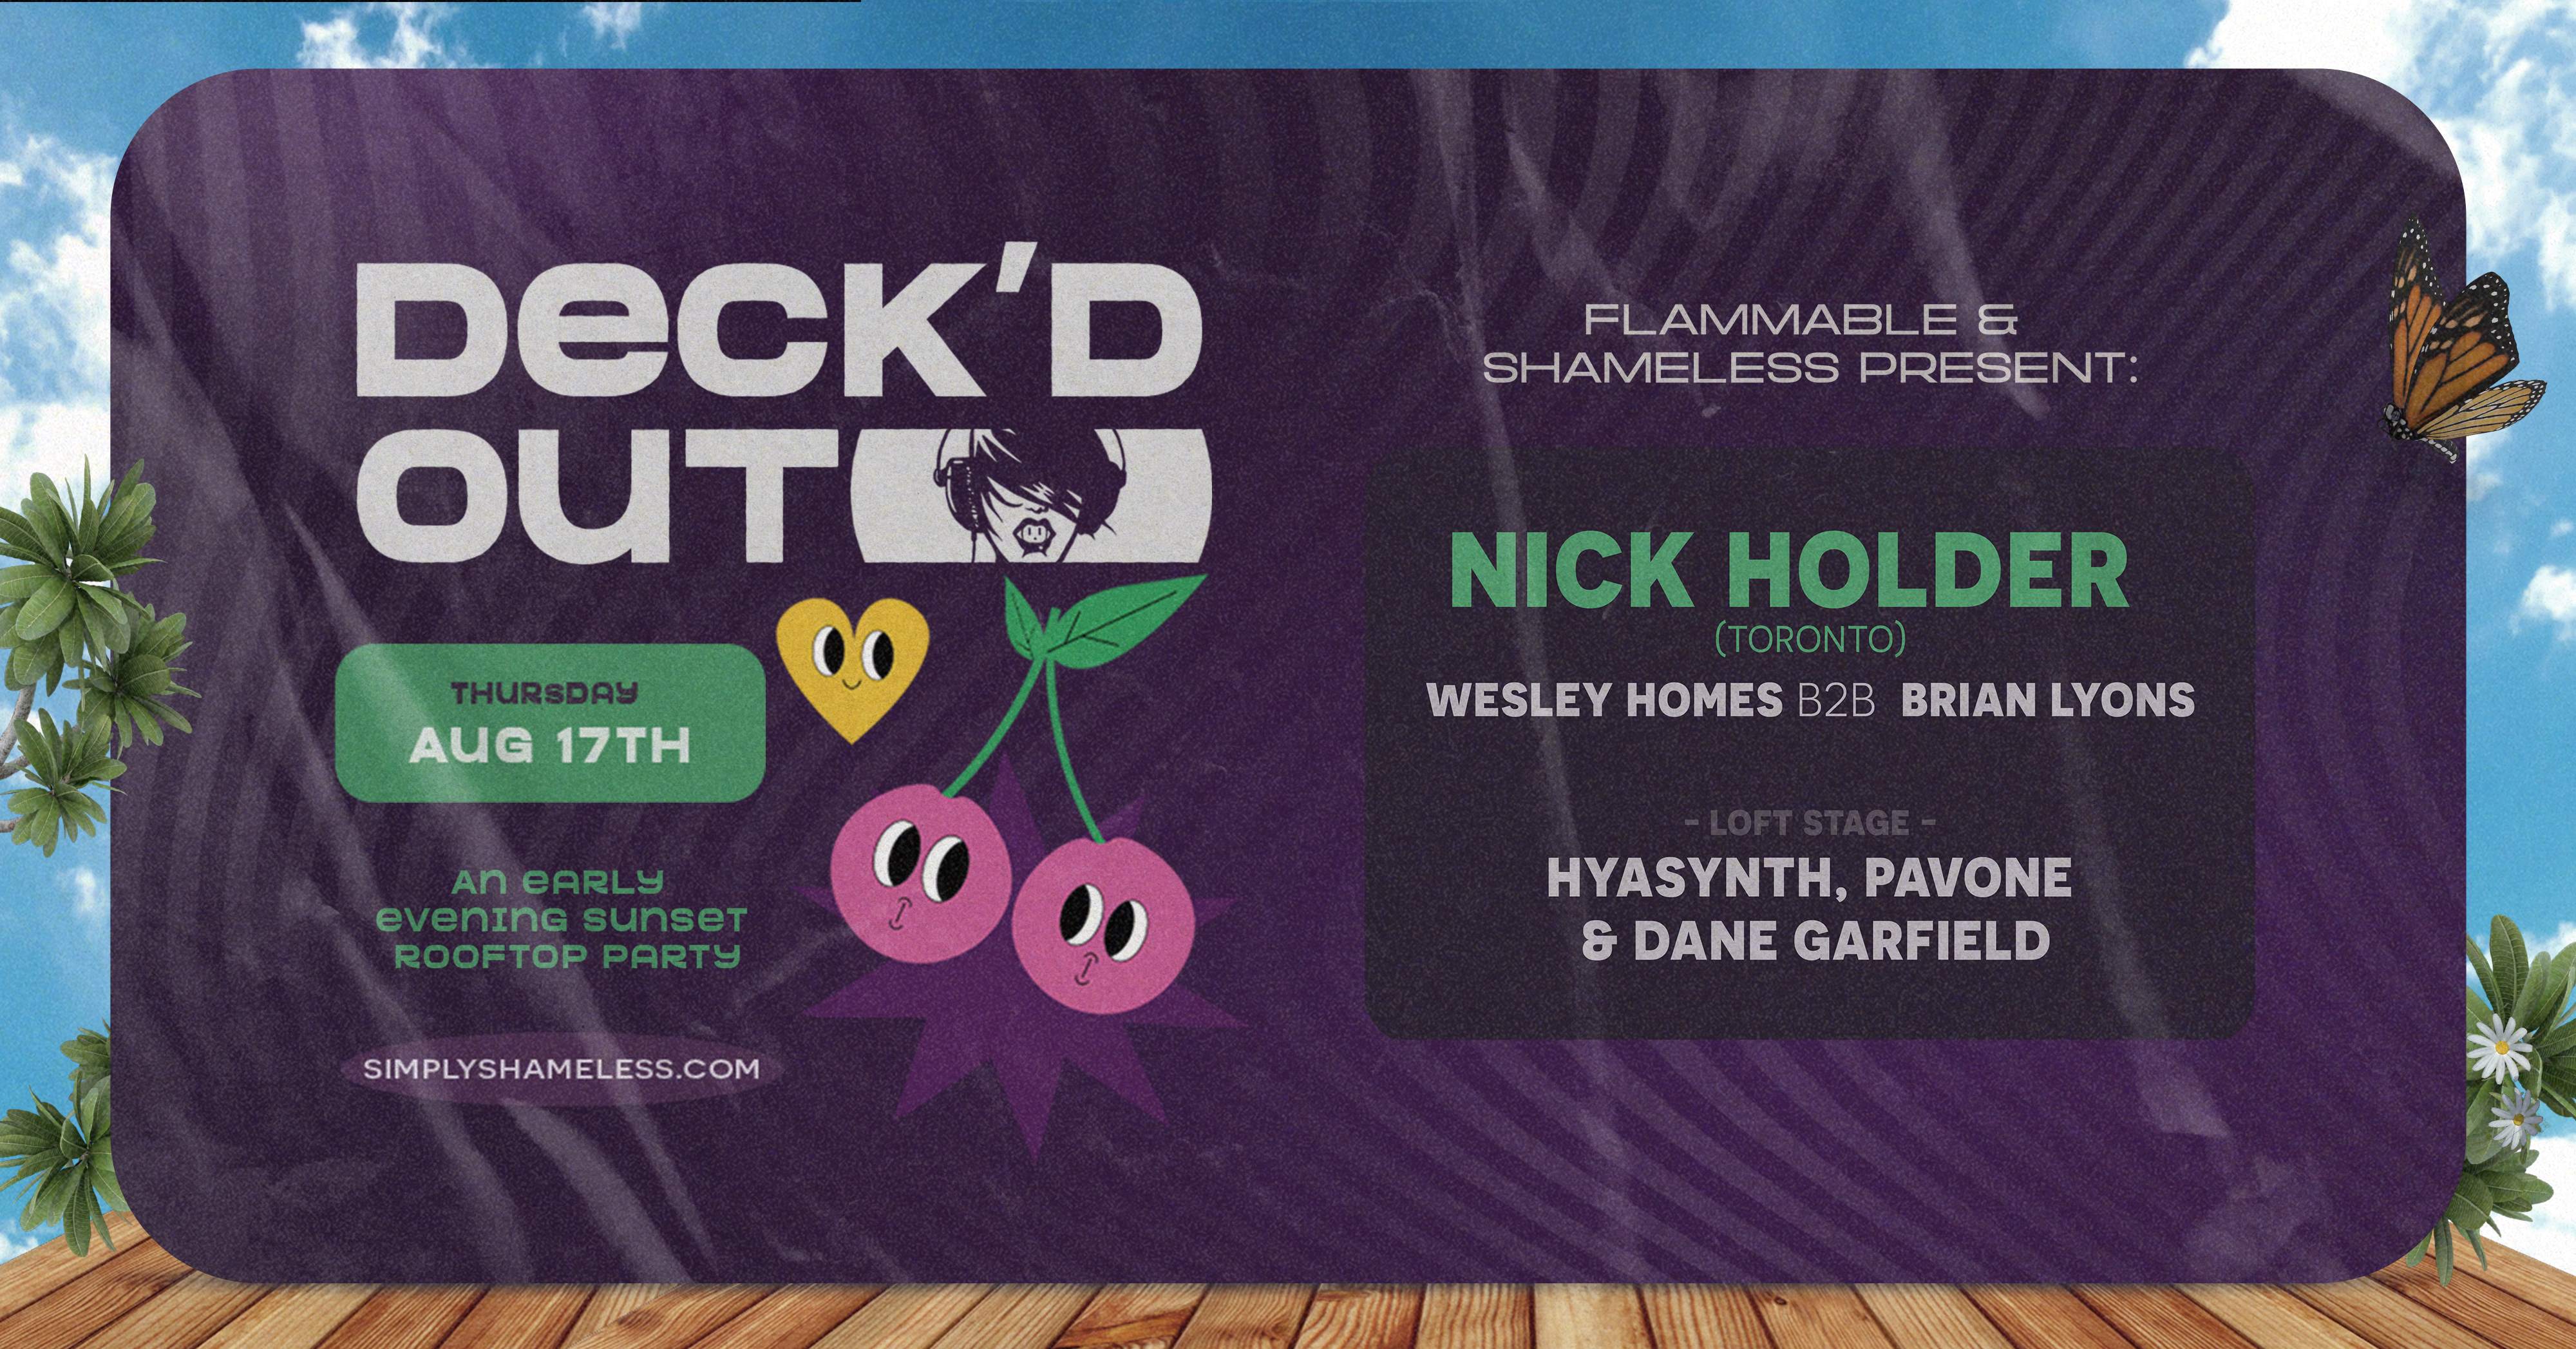 Deck'd Out #8 Nick Holder (Toronto) & Flammable Residents - フライヤー表